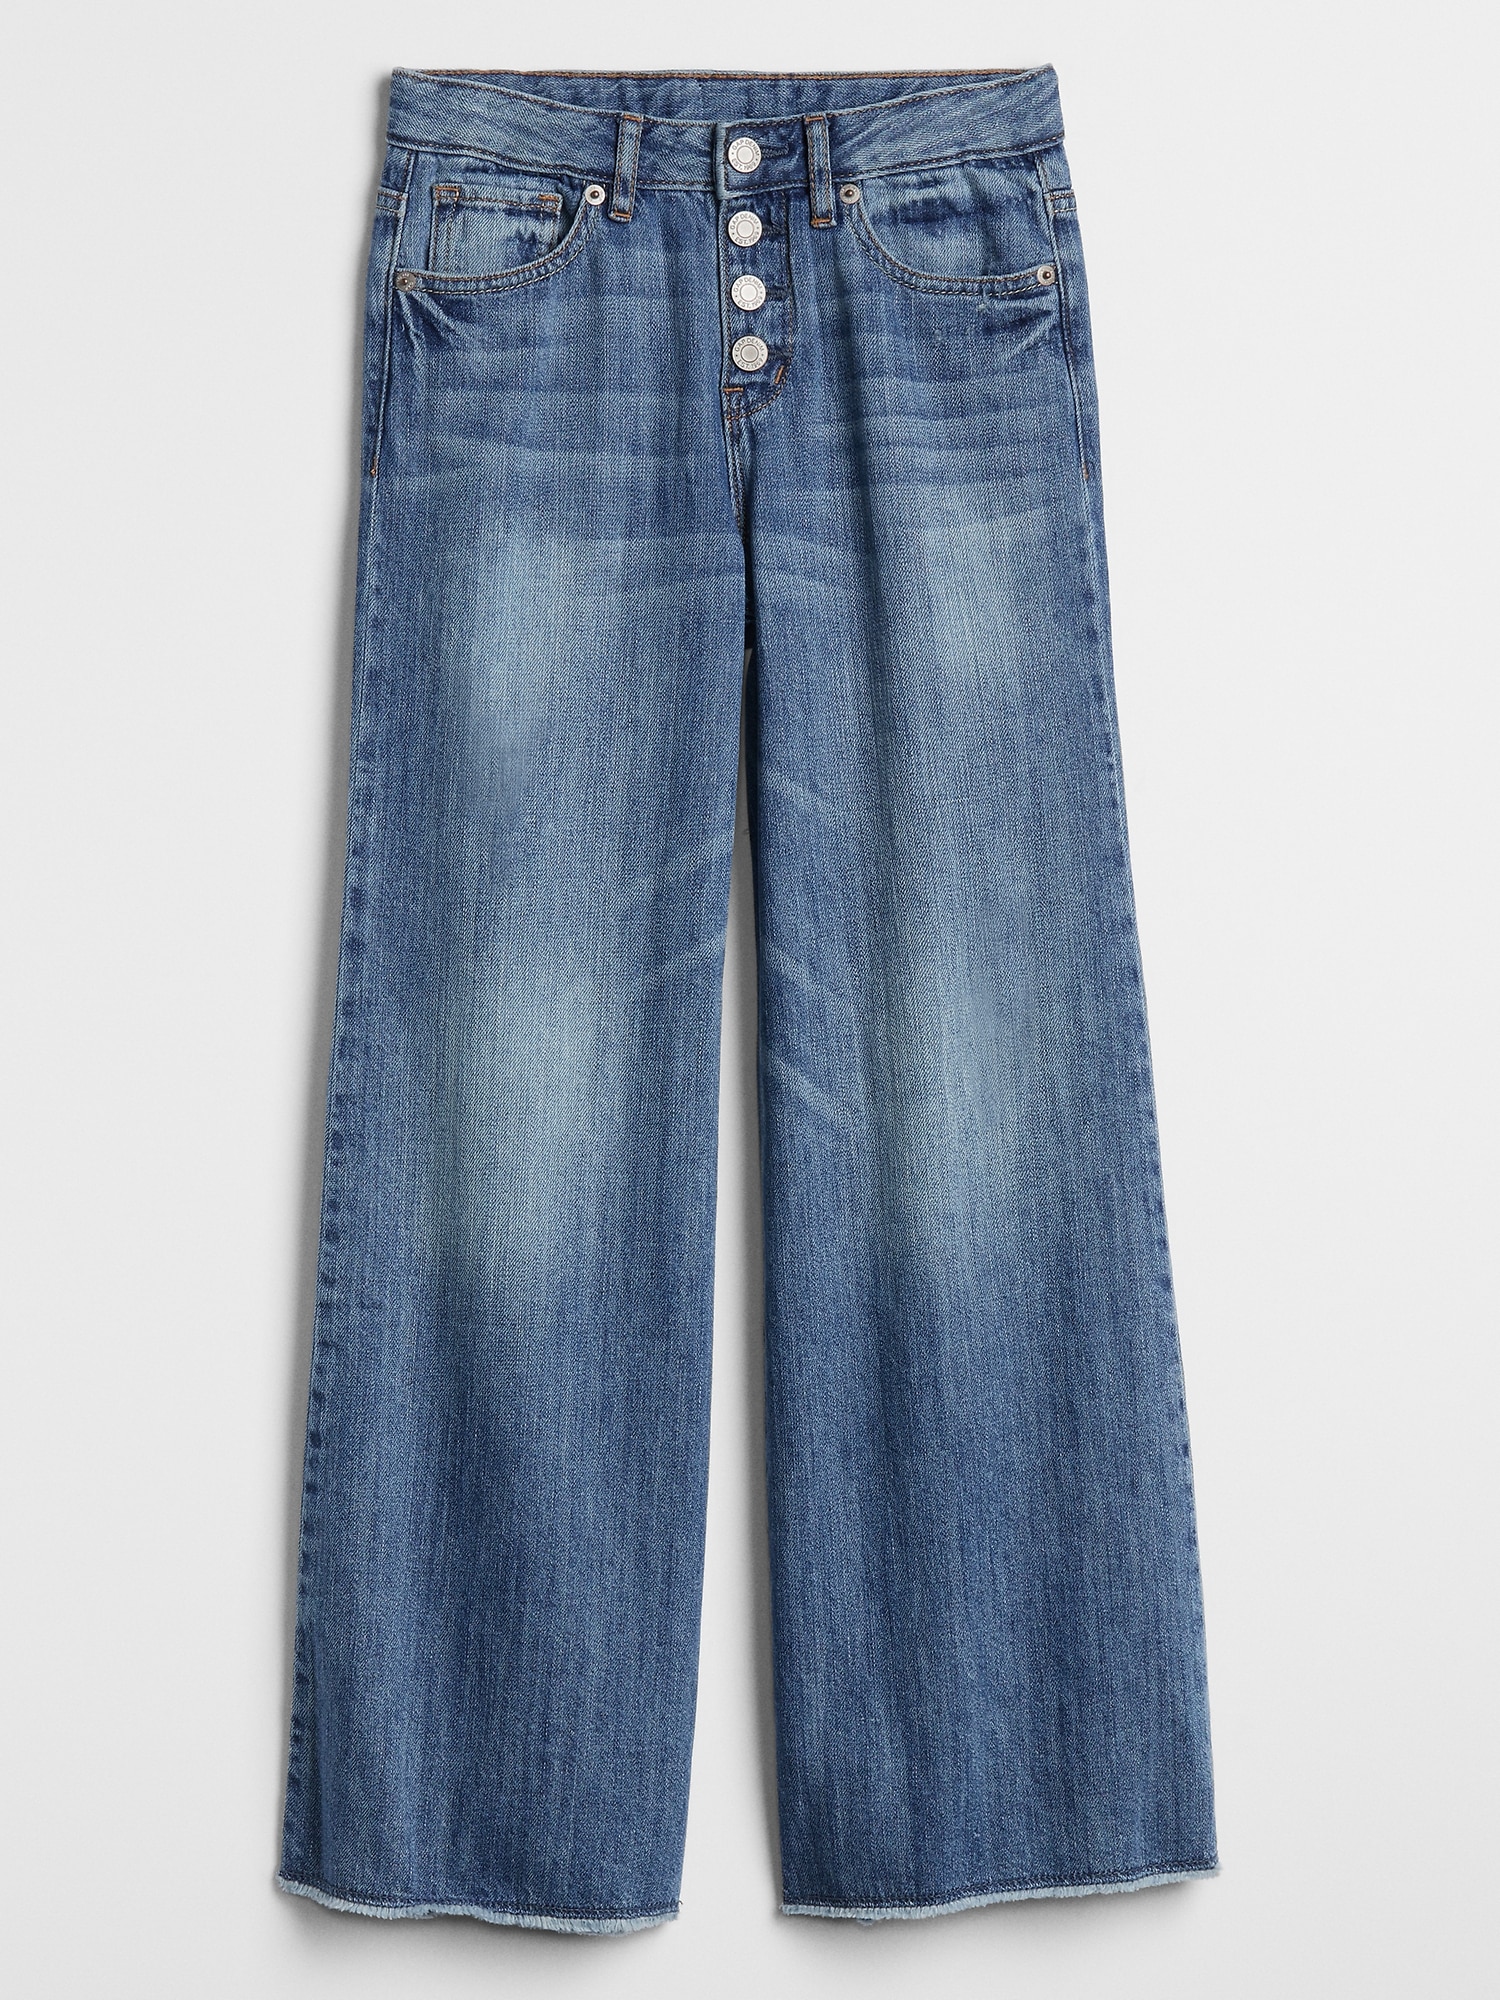 bell bottom jeans size 20